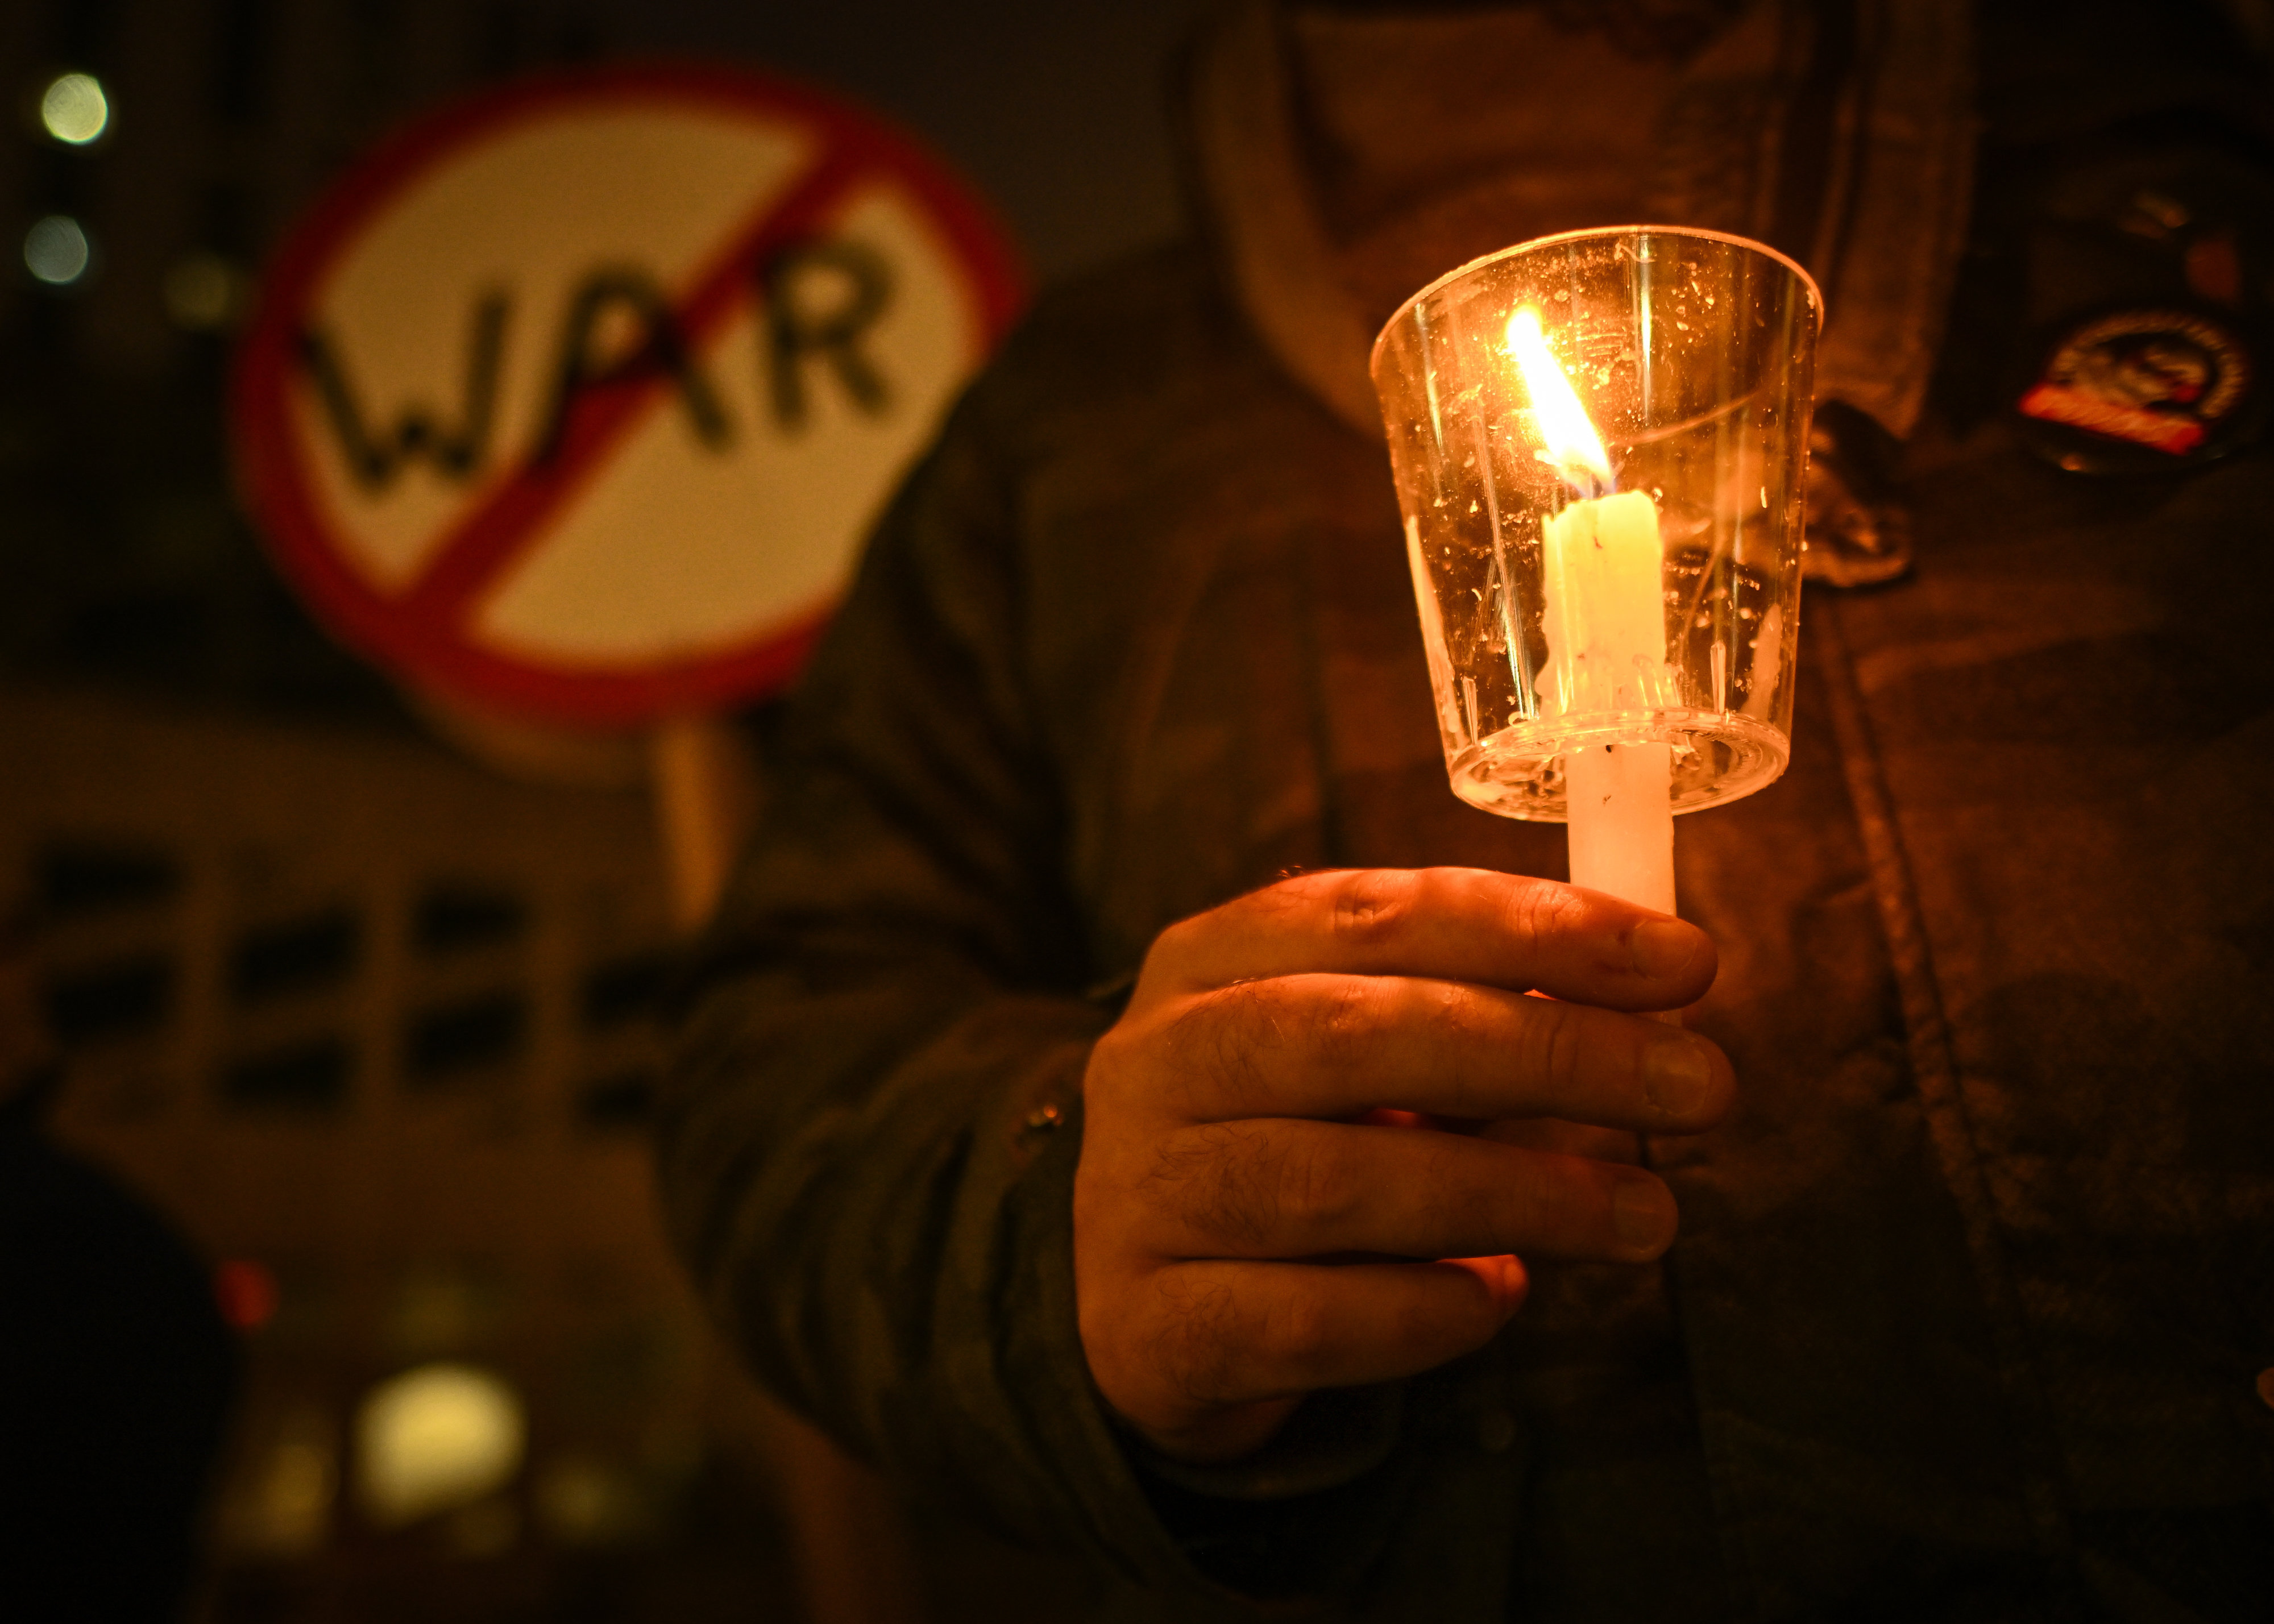 Close-up of a person holding a candle. Behind him is a sign with "War" crossed out